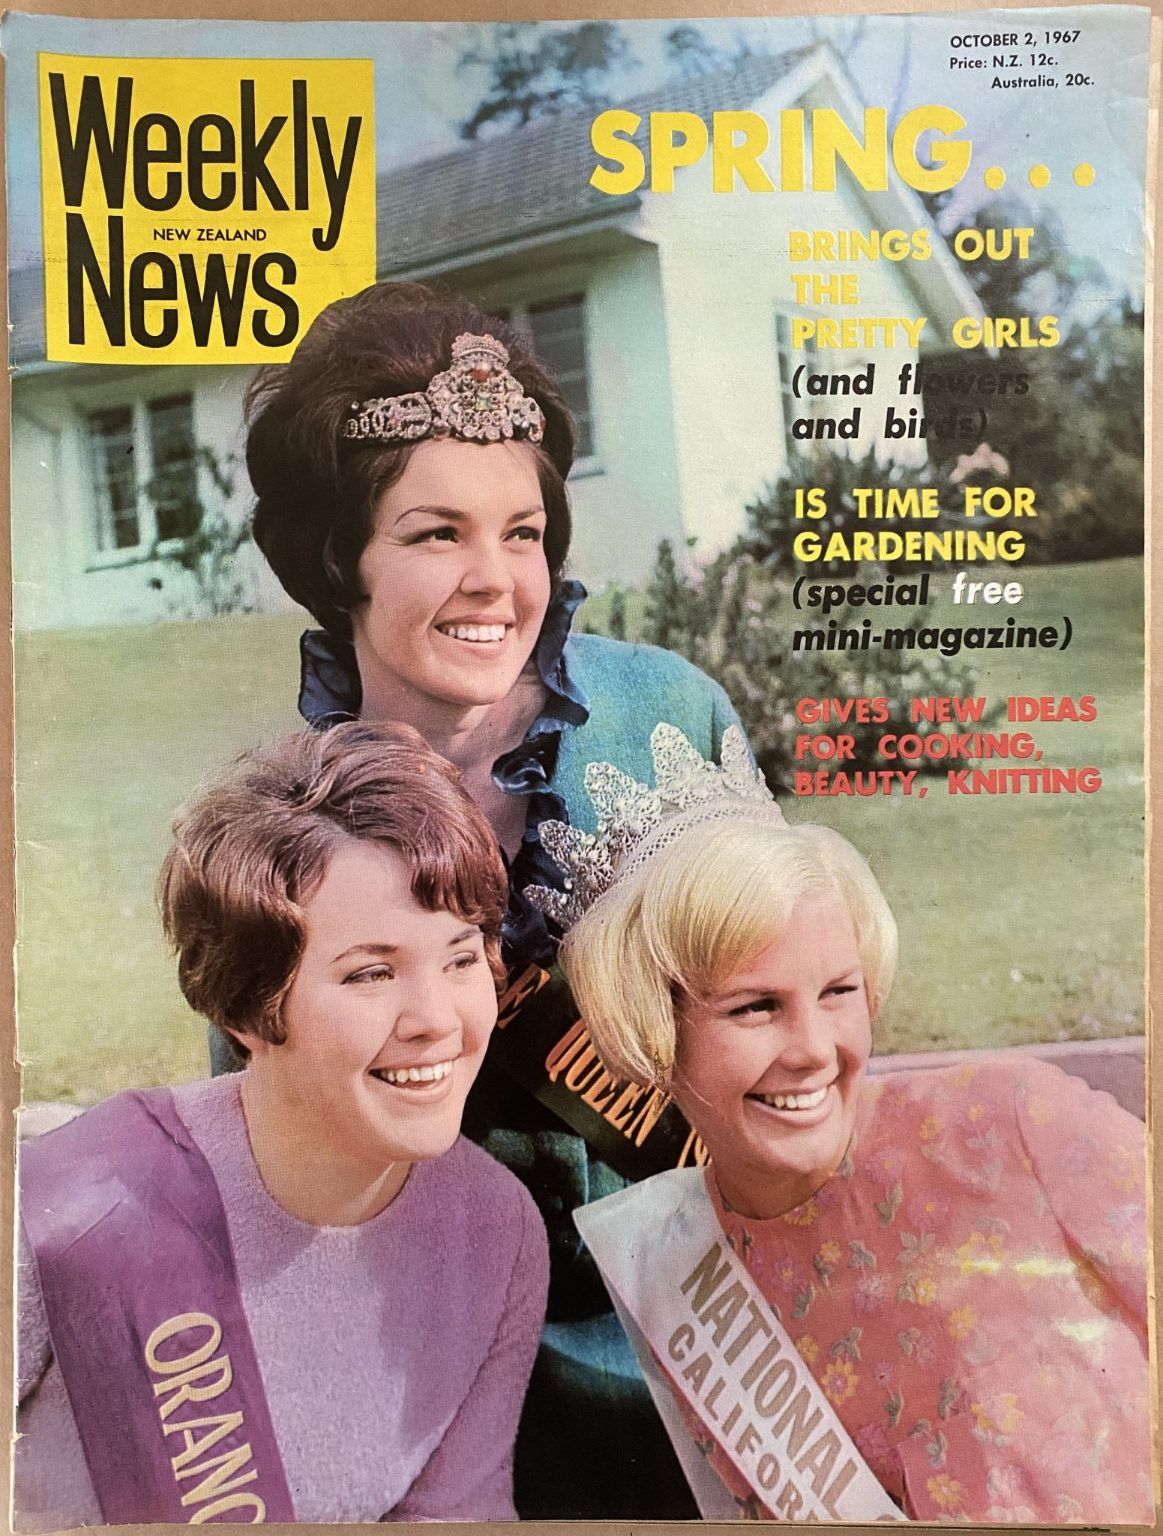 OLD NEWSPAPER: New Zealand Weekly News, No. 5418, 2 October 1967